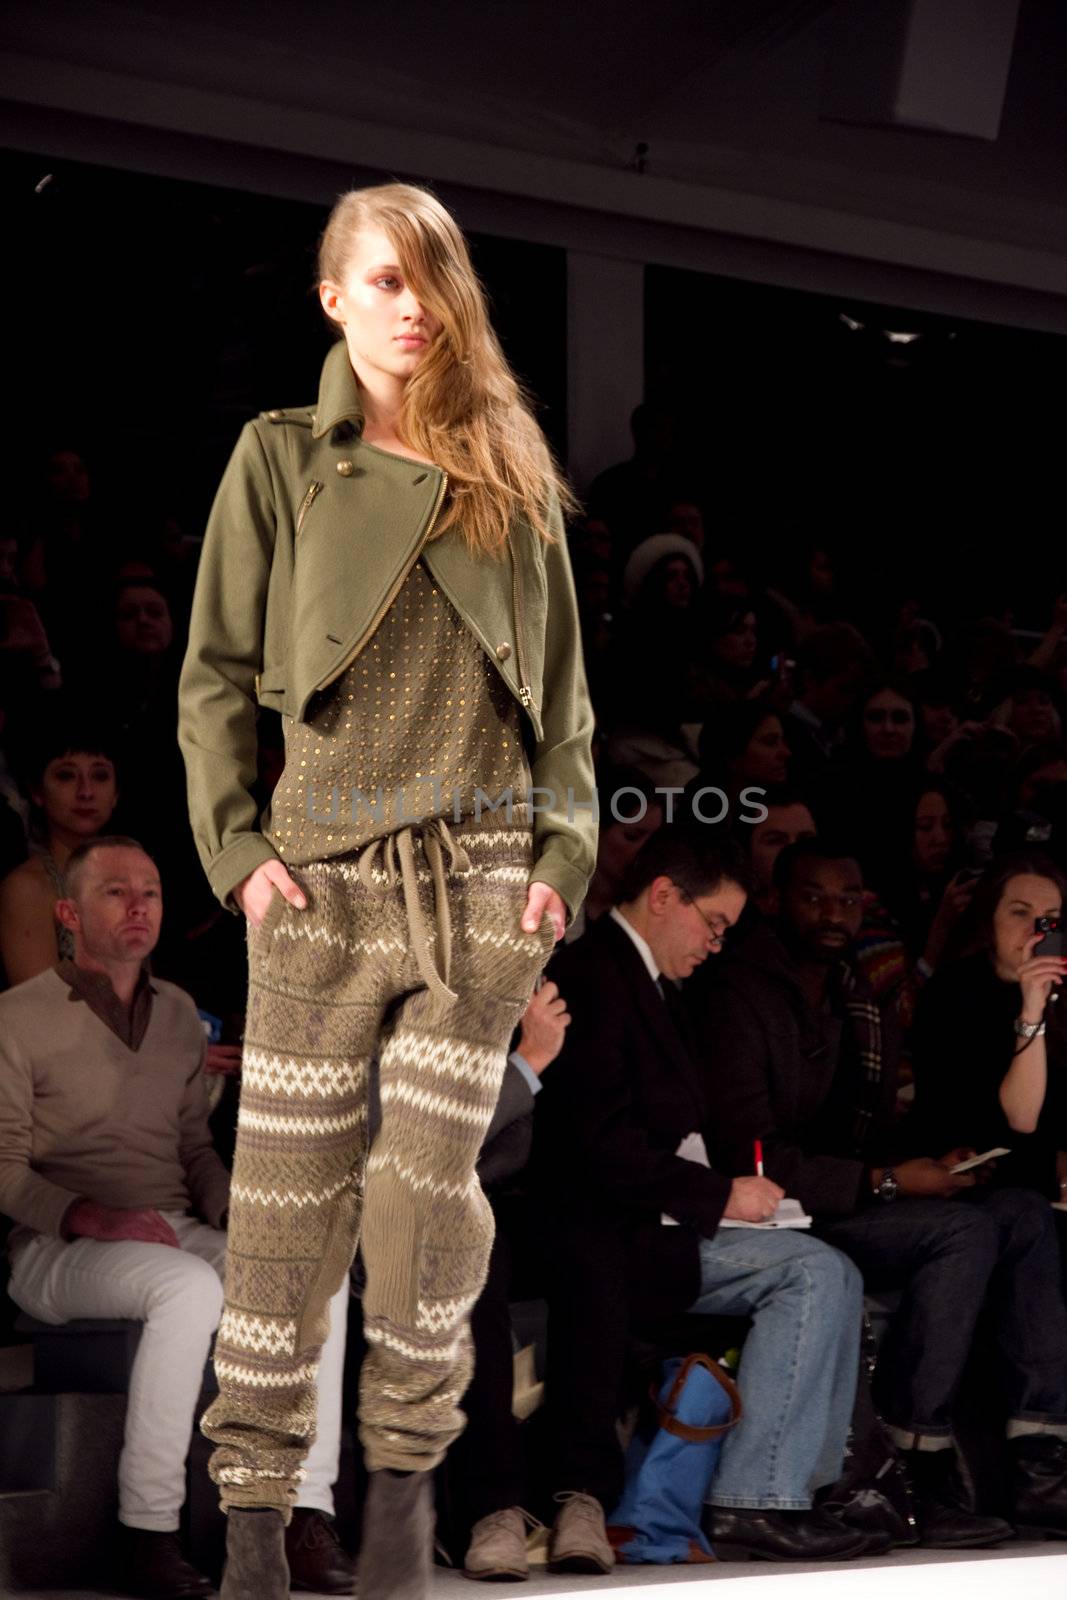 Charlotte Ronson Fall 2011 at New York Fashion Week at Lincoln Center by photopro